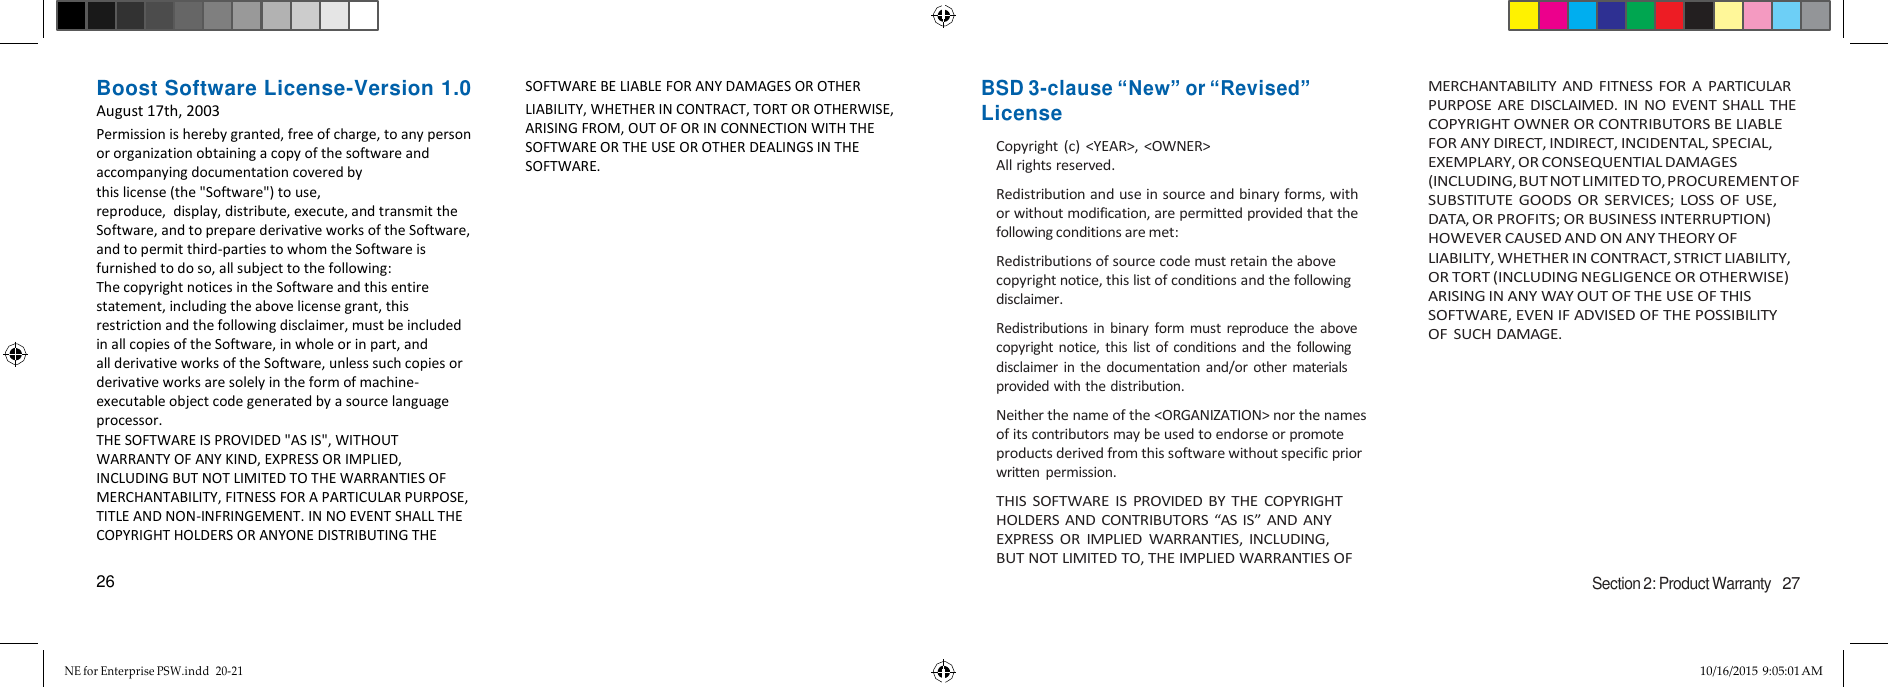 NE for Enterprise PSW.indd  20-21 10/16/2015 9:05:01 AM   Boost Software License-Version 1.0 August 17th, 2003 Permission is hereby granted, free of charge, to any person or organization obtaining a copy of the software and accompanying documentation covered by this license (the &quot;Software&quot;) to use, reproduce,  display, distribute, execute, and transmit the Software, and to prepare derivative works of the Software, and to permit third-parties to whom the Software is furnished to do so, all subject to the following: The copyright notices in the Software and this entire statement, including the above license grant, this restriction and the following disclaimer, must be included in all copies of the Software, in whole or in part, and all derivative works of the Software, unless such copies or derivative works are solely in the form of machine-executable object code generated by a source language processor. THE SOFTWARE IS PROVIDED &quot;AS IS&quot;, WITHOUT WARRANTY OF ANY KIND, EXPRESS OR IMPLIED, INCLUDING BUT NOT LIMITED TO THE WARRANTIES OF MERCHANTABILITY, FITNESS FOR A PARTICULAR PURPOSE, TITLE AND NON-INFRINGEMENT. IN NO EVENT SHALL THE COPYRIGHT HOLDERS OR ANYONE DISTRIBUTING THE   26 SOFTWARE BE LIABLE FOR ANY DAMAGES OR OTHER  LIABILITY, WHETHER IN CONTRACT, TORT OR OTHERWISE, ARISING FROM, OUT OF OR IN CONNECTION WITH THE SOFTWARE OR THE USE OR OTHER DEALINGS IN THE SOFTWARE.                   BSD 3-clause “New” or “Revised” License Copyright  (c)  &lt;YEAR&gt;,  &lt;OWNER&gt; All rights reserved. Redistribution and use in source and binary forms, with or without modification, are permitted provided that the following conditions are met: Redistributions of source code must retain the above copyright notice, this list of conditions and the following disclaimer. Redistributions in  binary  form must  reproduce  the  above copyright notice,  this list  of  conditions  and the following disclaimer  in  the  documentation and/or  other  materials provided with the distribution. Neither the name of the &lt;ORGANIZATION&gt; nor the names of its contributors may be used to endorse or promote products derived from this software without specific prior written  permission. THIS SOFTWARE IS  PROVIDED BY  THE COPYRIGHT HOLDERS AND CONTRIBUTORS “AS IS” AND ANY EXPRESS  OR  IMPLIED  WARRANTIES,  INCLUDING,  BUT NOT LIMITED TO, THE IMPLIED WARRANTIES OF    MERCHANTABILITY AND FITNESS  FOR  A  PARTICULAR PURPOSE ARE DISCLAIMED.  IN NO  EVENT SHALL THE COPYRIGHT OWNER OR CONTRIBUTORS BE LIABLE FOR ANY DIRECT, INDIRECT, INCIDENTAL, SPECIAL, EXEMPLARY, OR CONSEQUENTIAL DAMAGES (INCLUDING, BUT NOT LIMITED TO, PROCUREMENT OF SUBSTITUTE GOODS OR SERVICES; LOSS OF USE, DATA, OR PROFITS; OR BUSINESS INTERRUPTION) HOWEVER CAUSED AND ON ANY THEORY OF LIABILITY, WHETHER IN CONTRACT, STRICT LIABILITY, OR TORT (INCLUDING NEGLIGENCE OR OTHERWISE) ARISING IN ANY WAY OUT OF THE USE OF THIS SOFTWARE, EVEN IF ADVISED OF THE POSSIBILITY OF SUCH DAMAGE.         Section 2: Product Warranty   27 